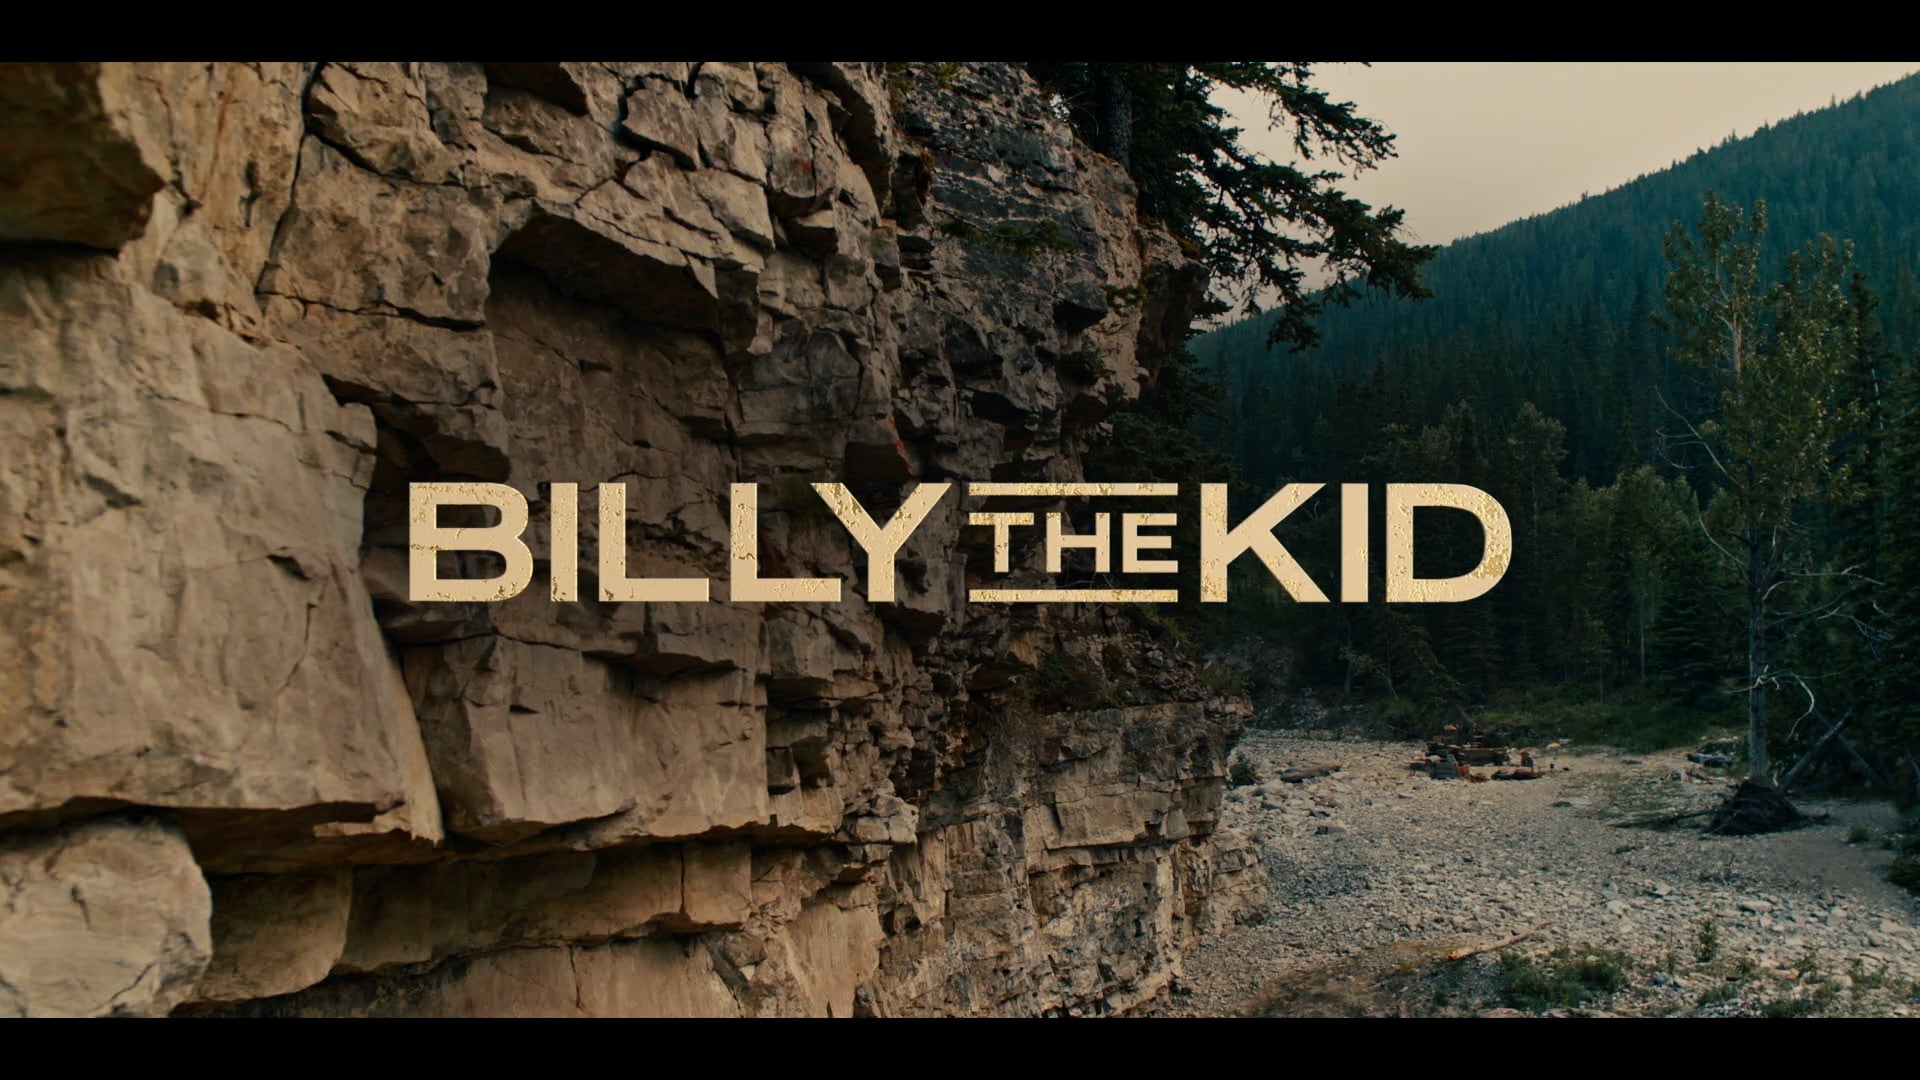 Billy the Kid Season 1 Overview